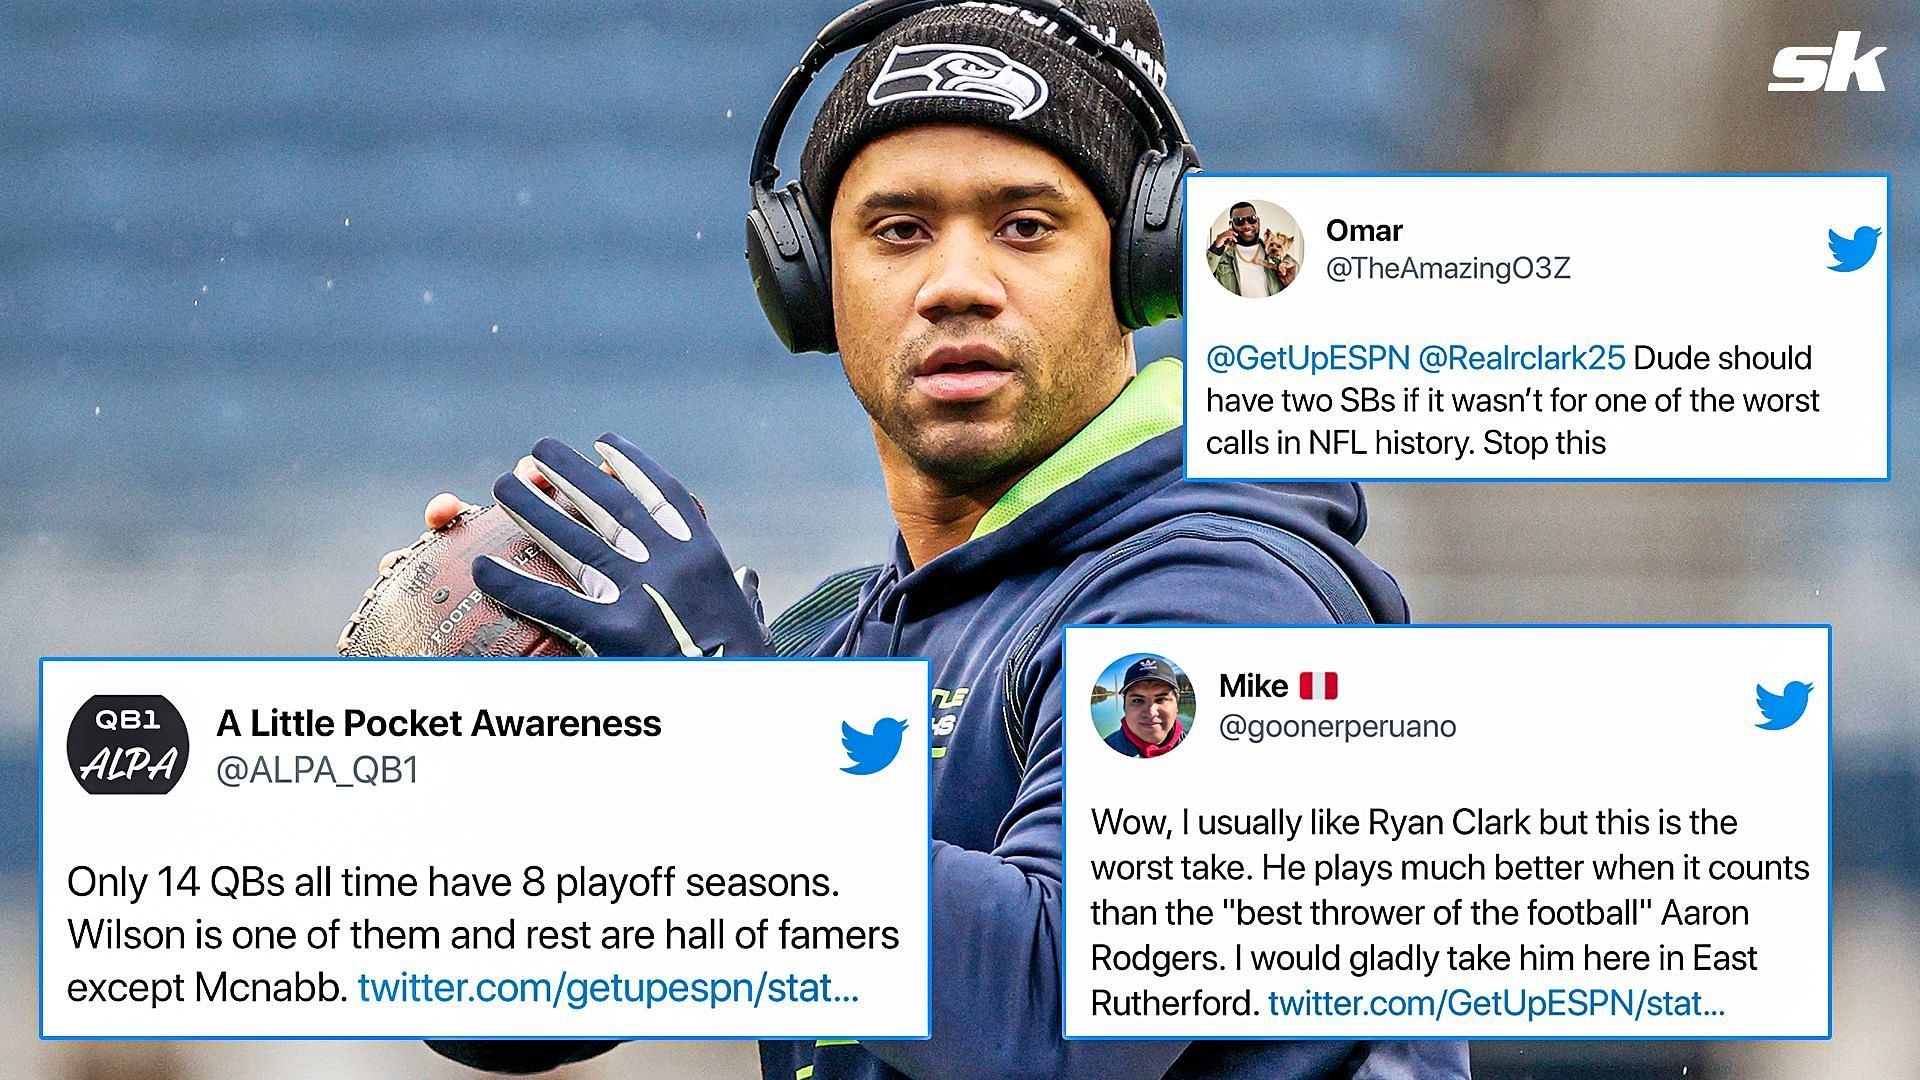 Seattle Seahawks QB Russell Wilson and Tweets regarding Ryan Clark&#039;s comments